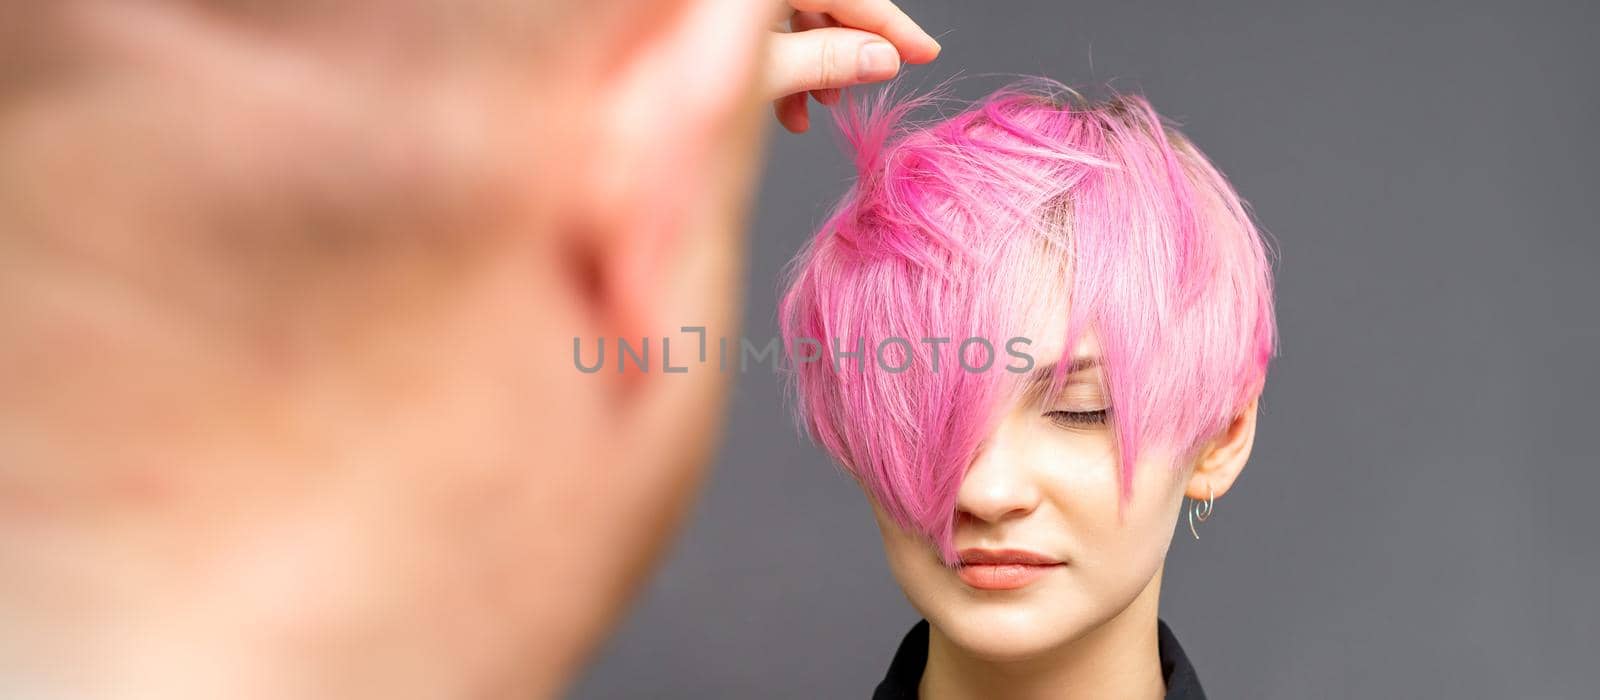 Hairdresser with hands is checking out and fixing the short pink hairstyle of the young white woman in a hair salon. by okskukuruza